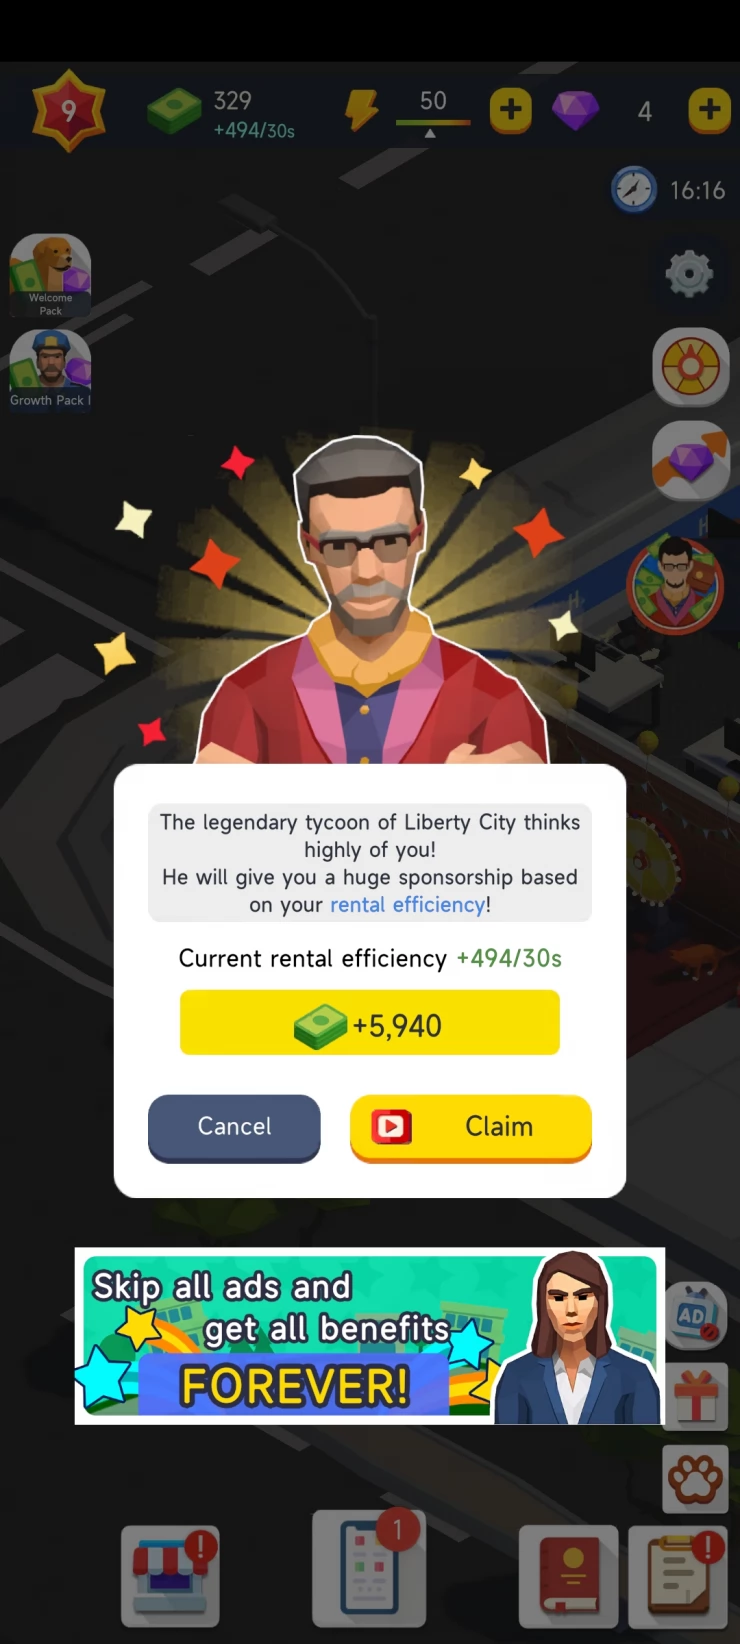 Idle Office Tycoon Gift Code & Idle Office Tycoon Cheats 